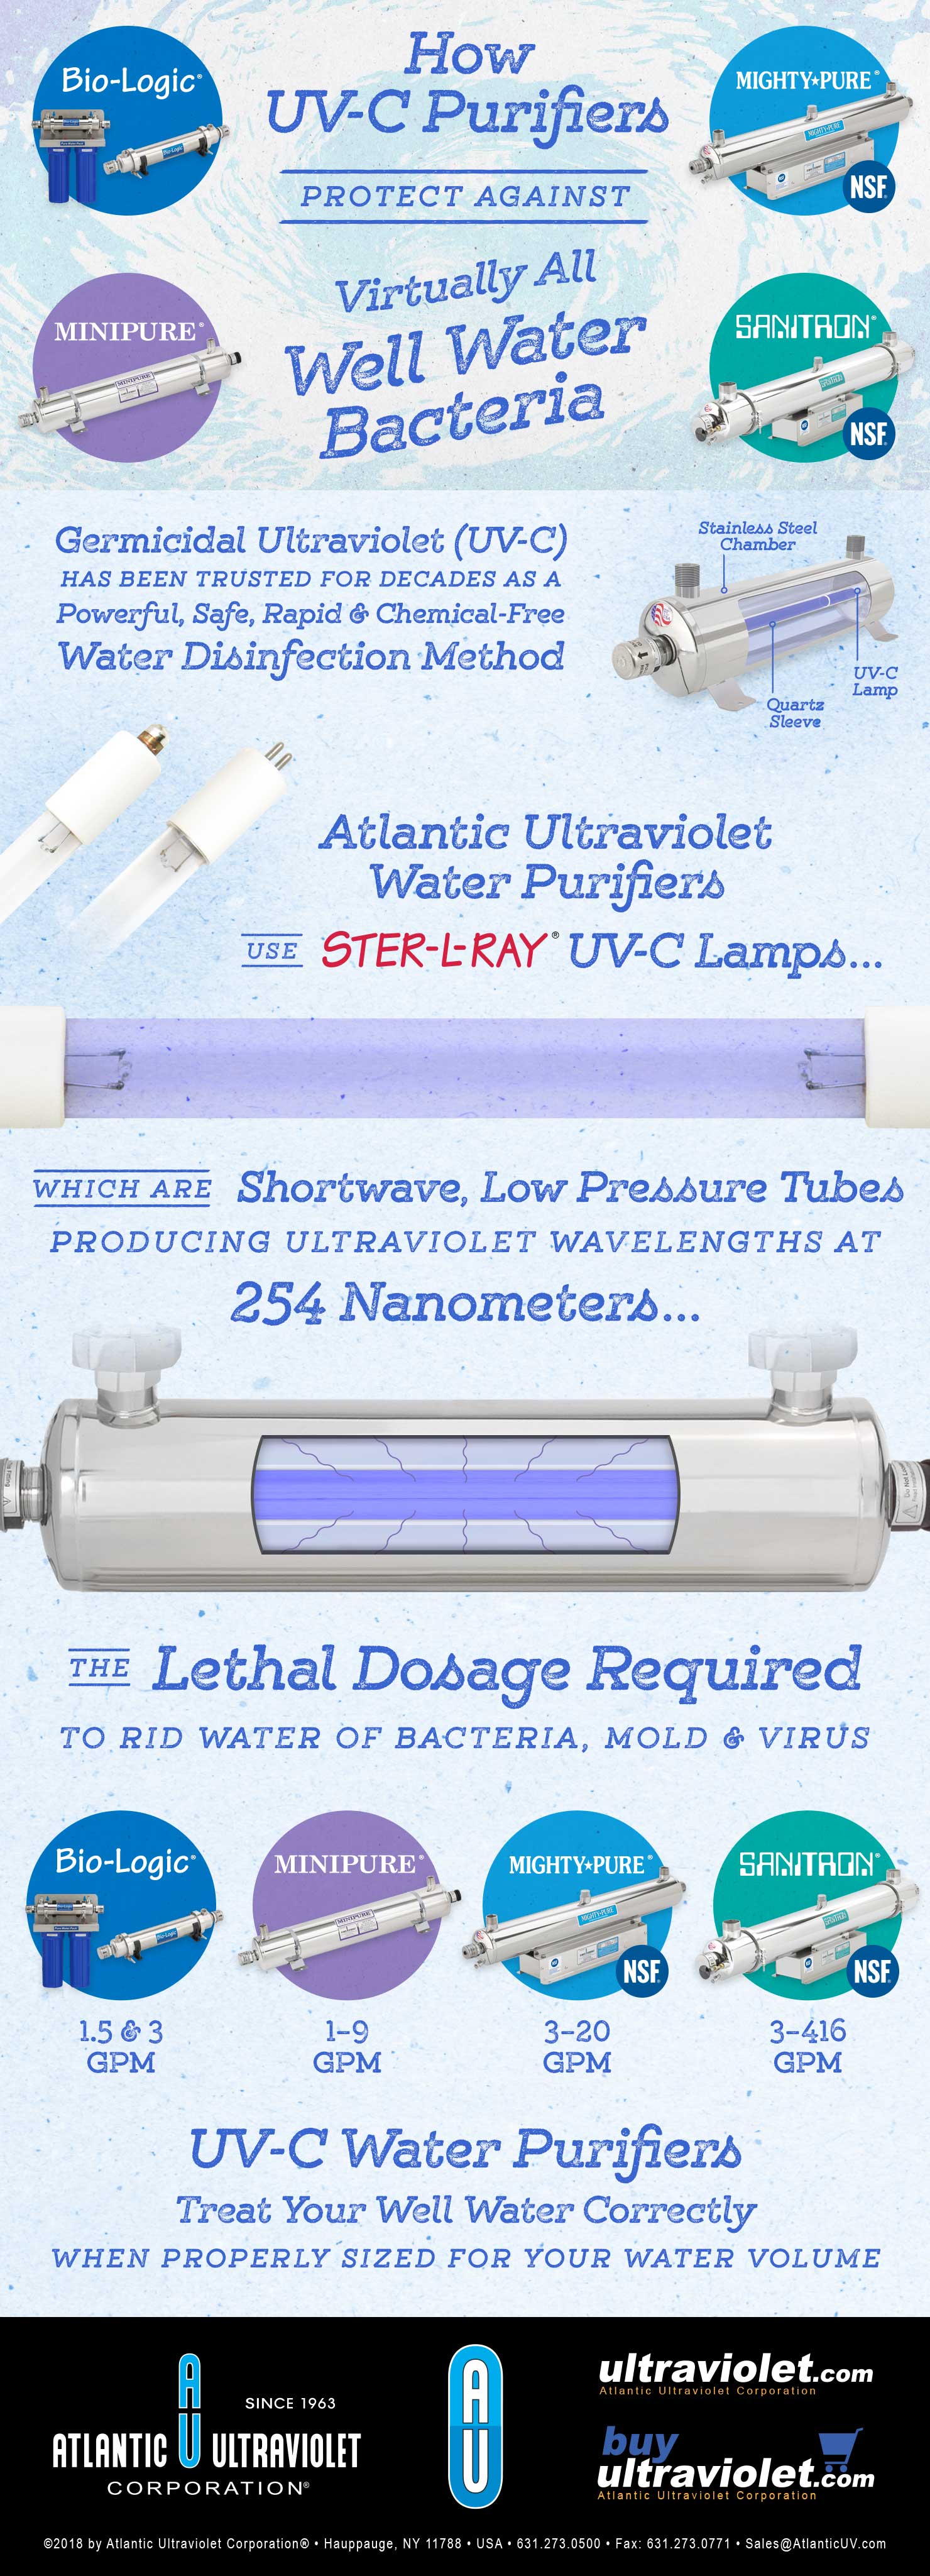 How UV-C Purifiers Protect Against Virtually All Well Water Bacteria - Infographic